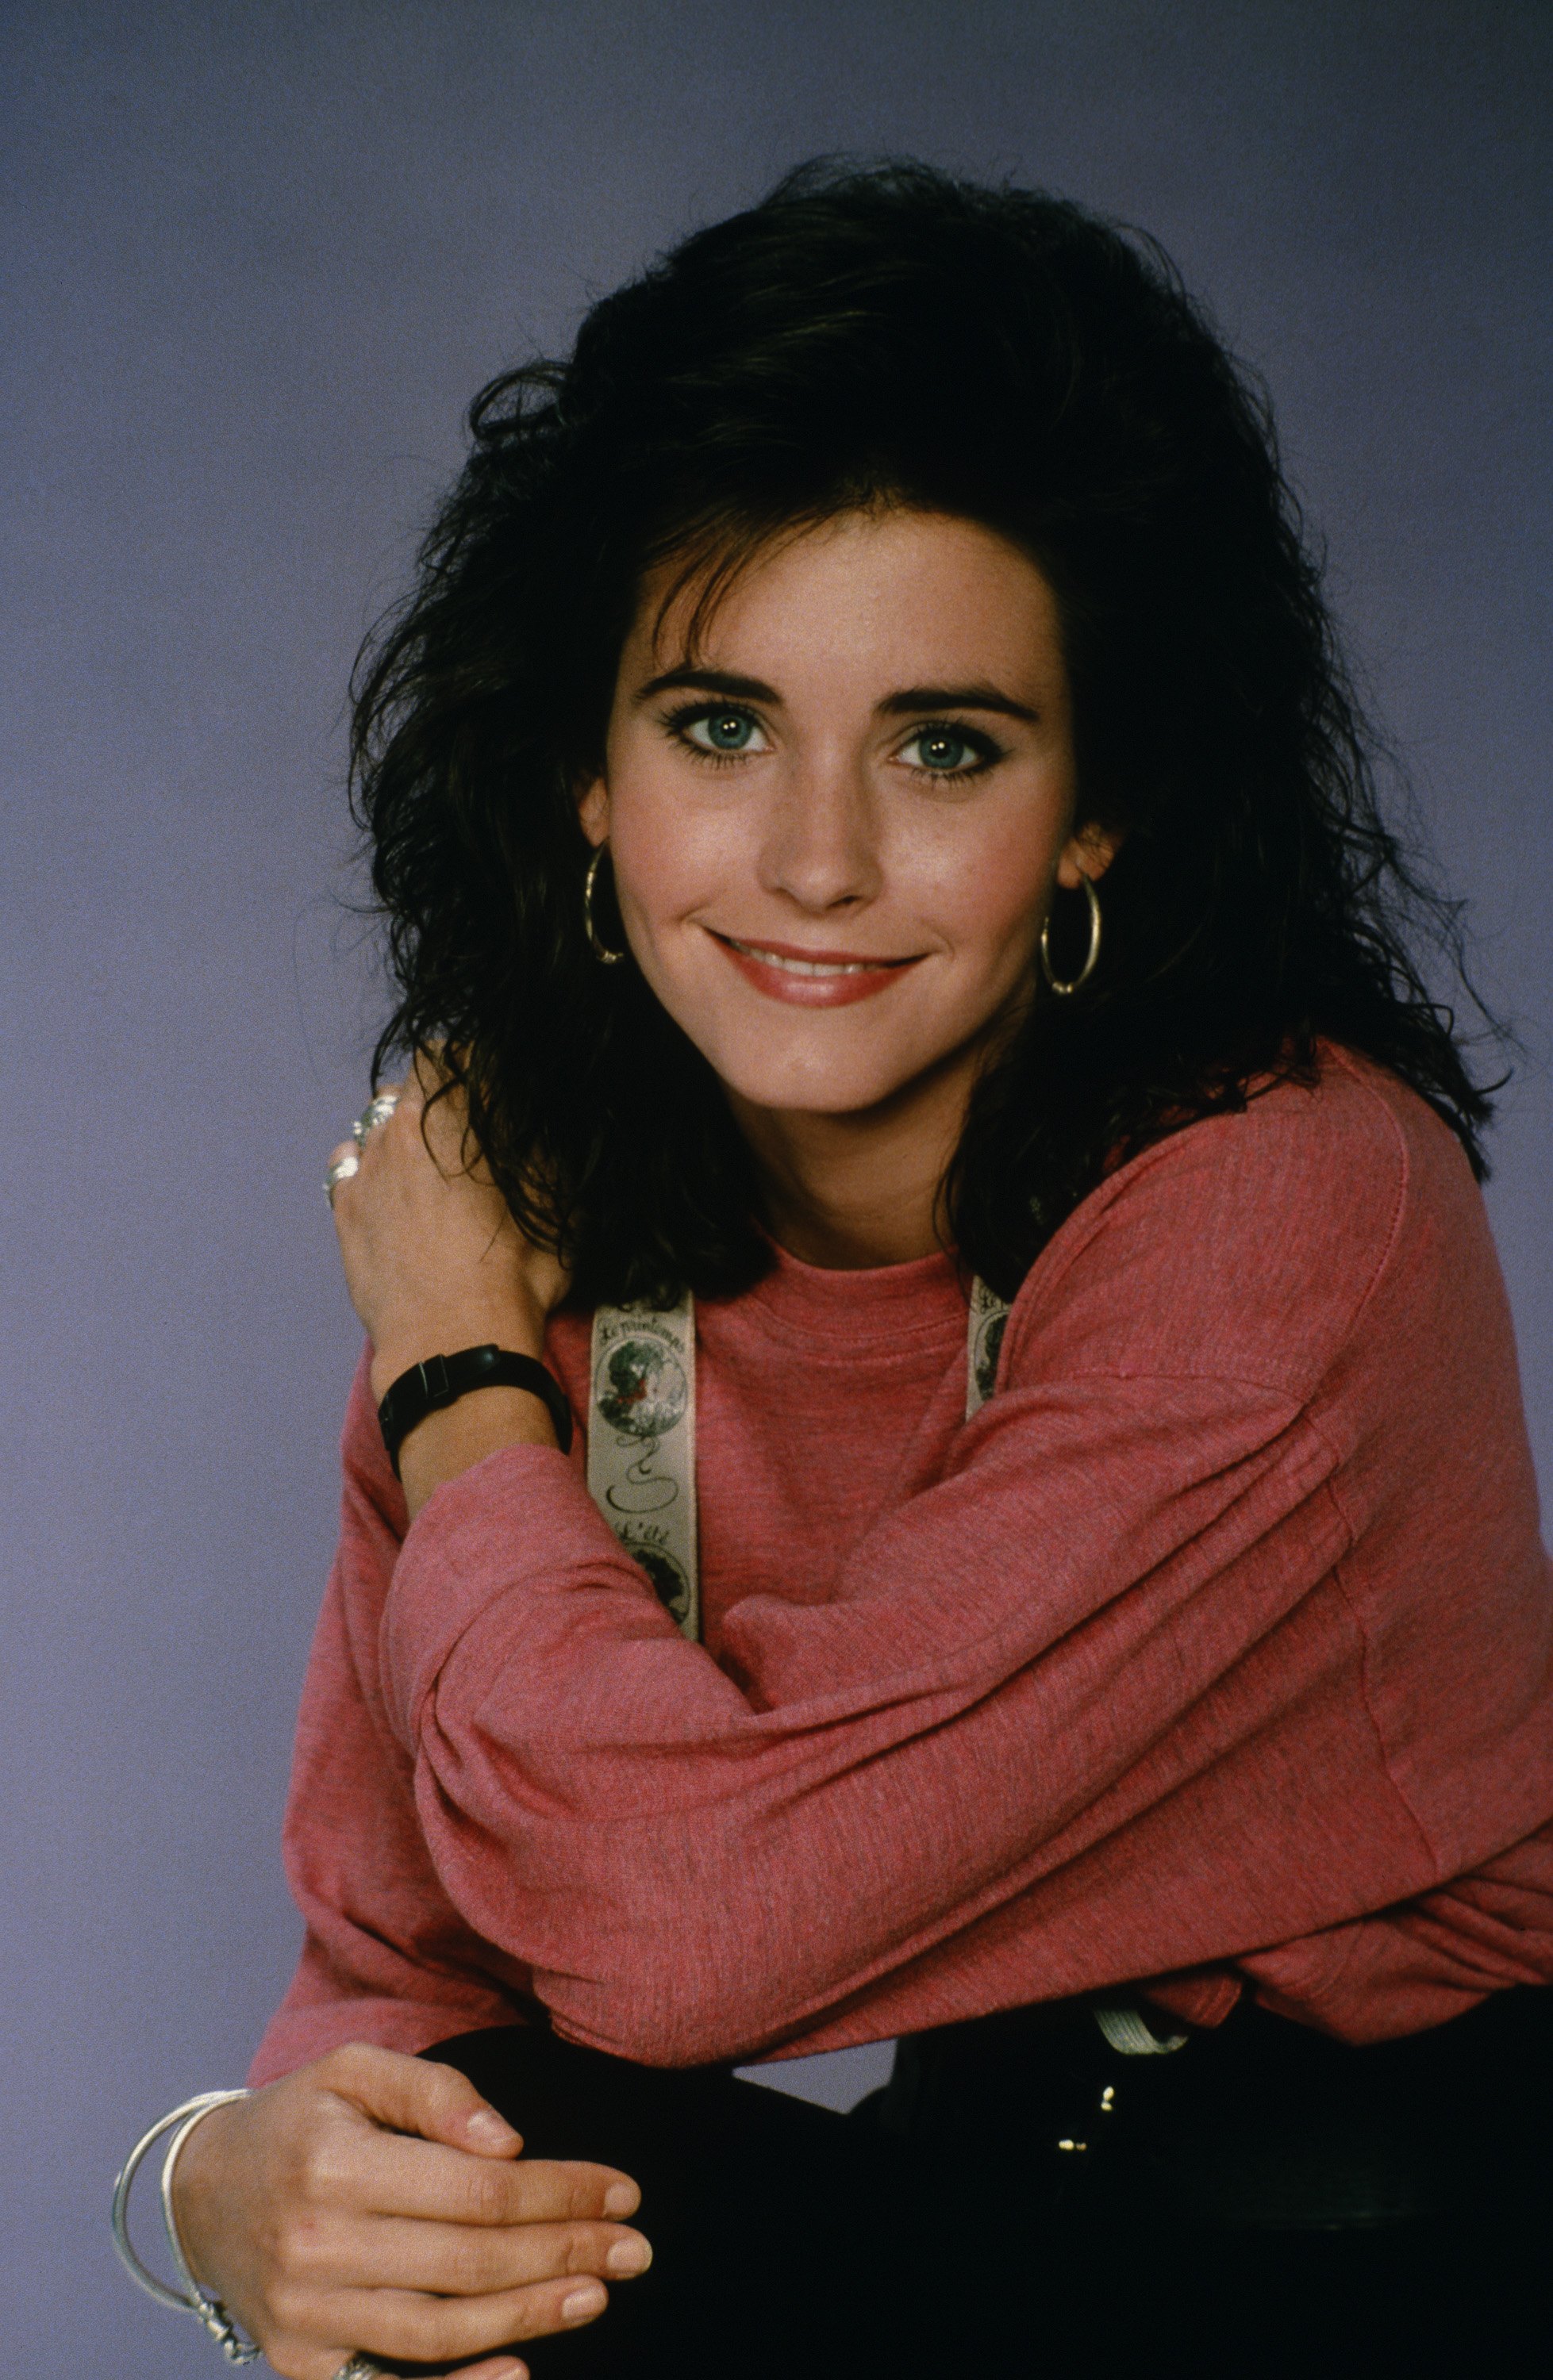 An undated image of Courteney Cox pictured on the set of "Family Ties" | Source: Getty Images